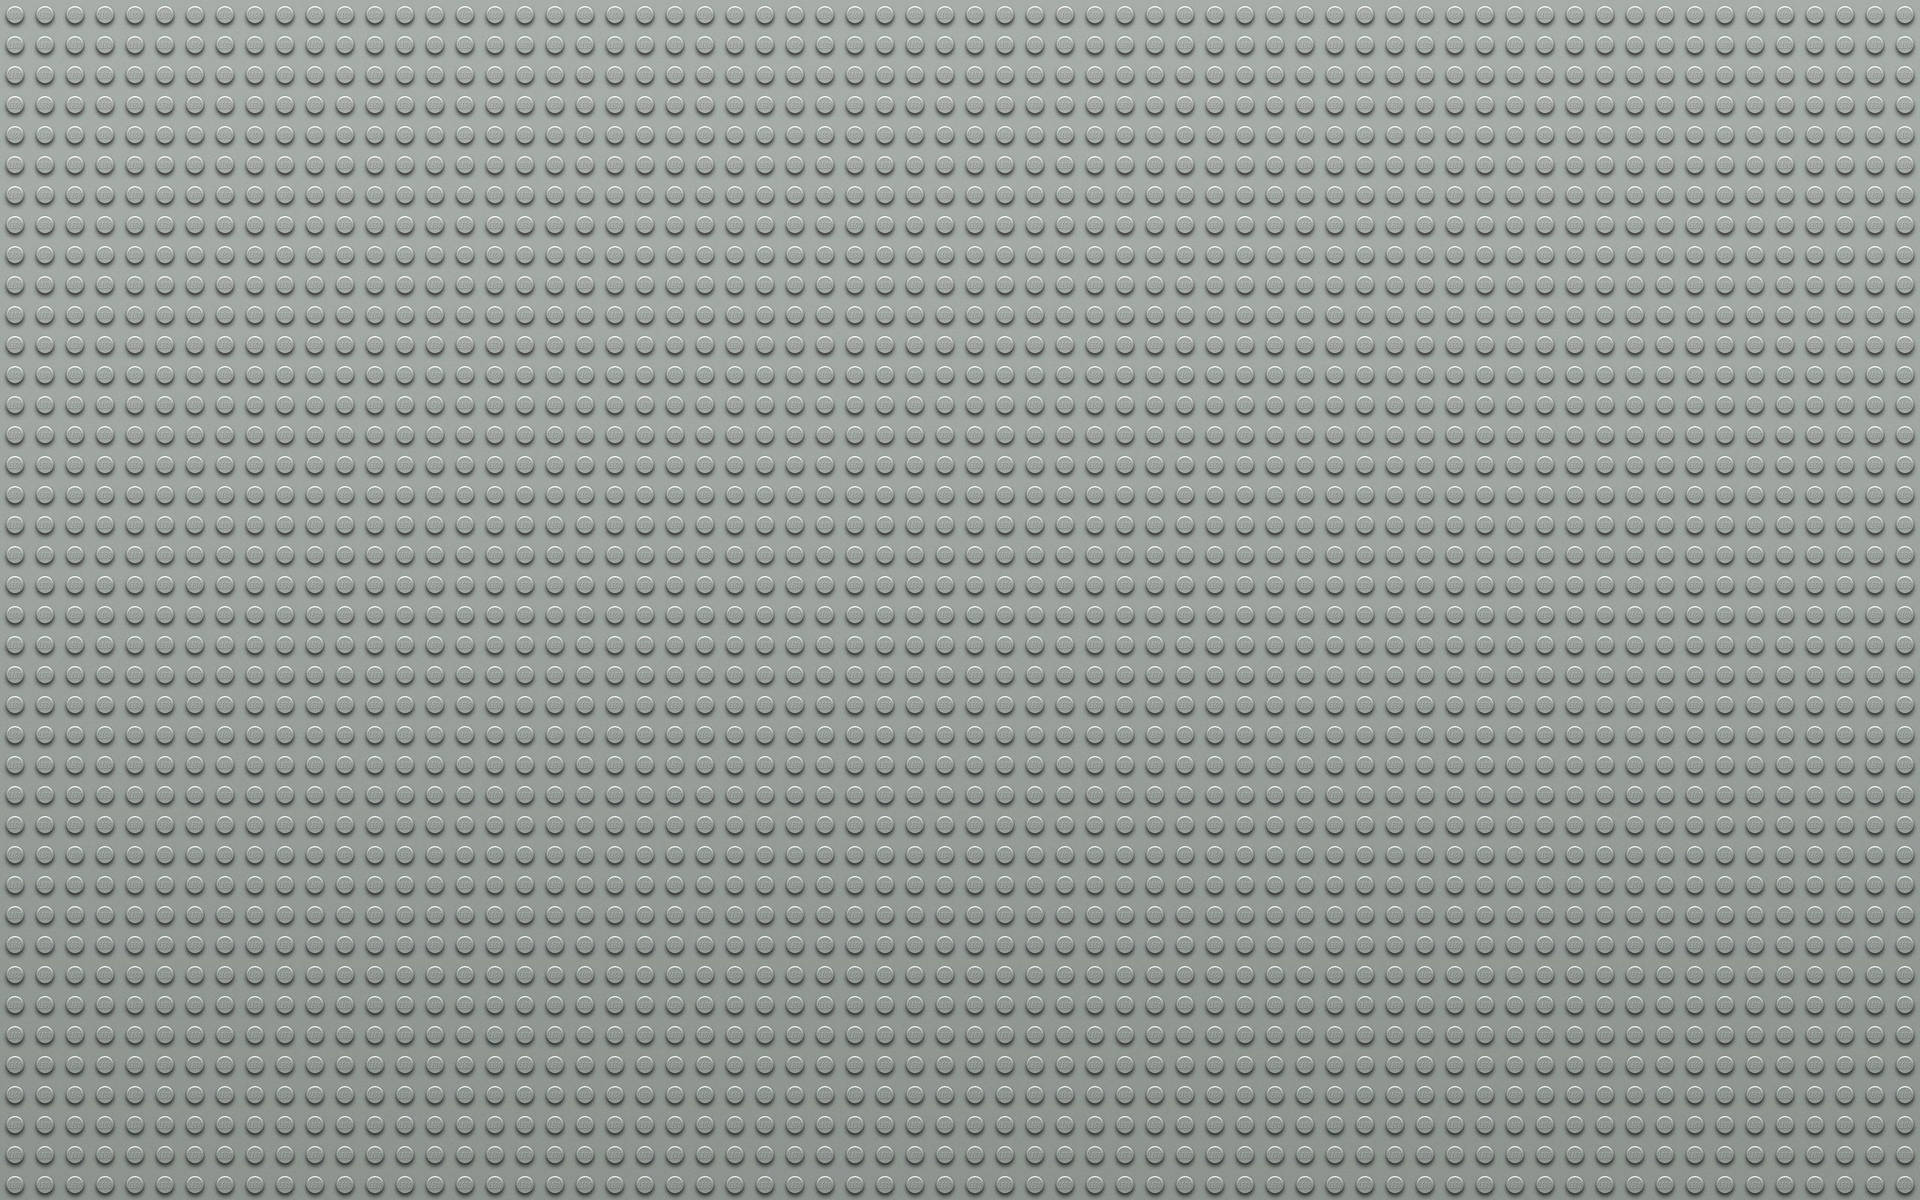 Gray Themed Lego Background Wallpaper